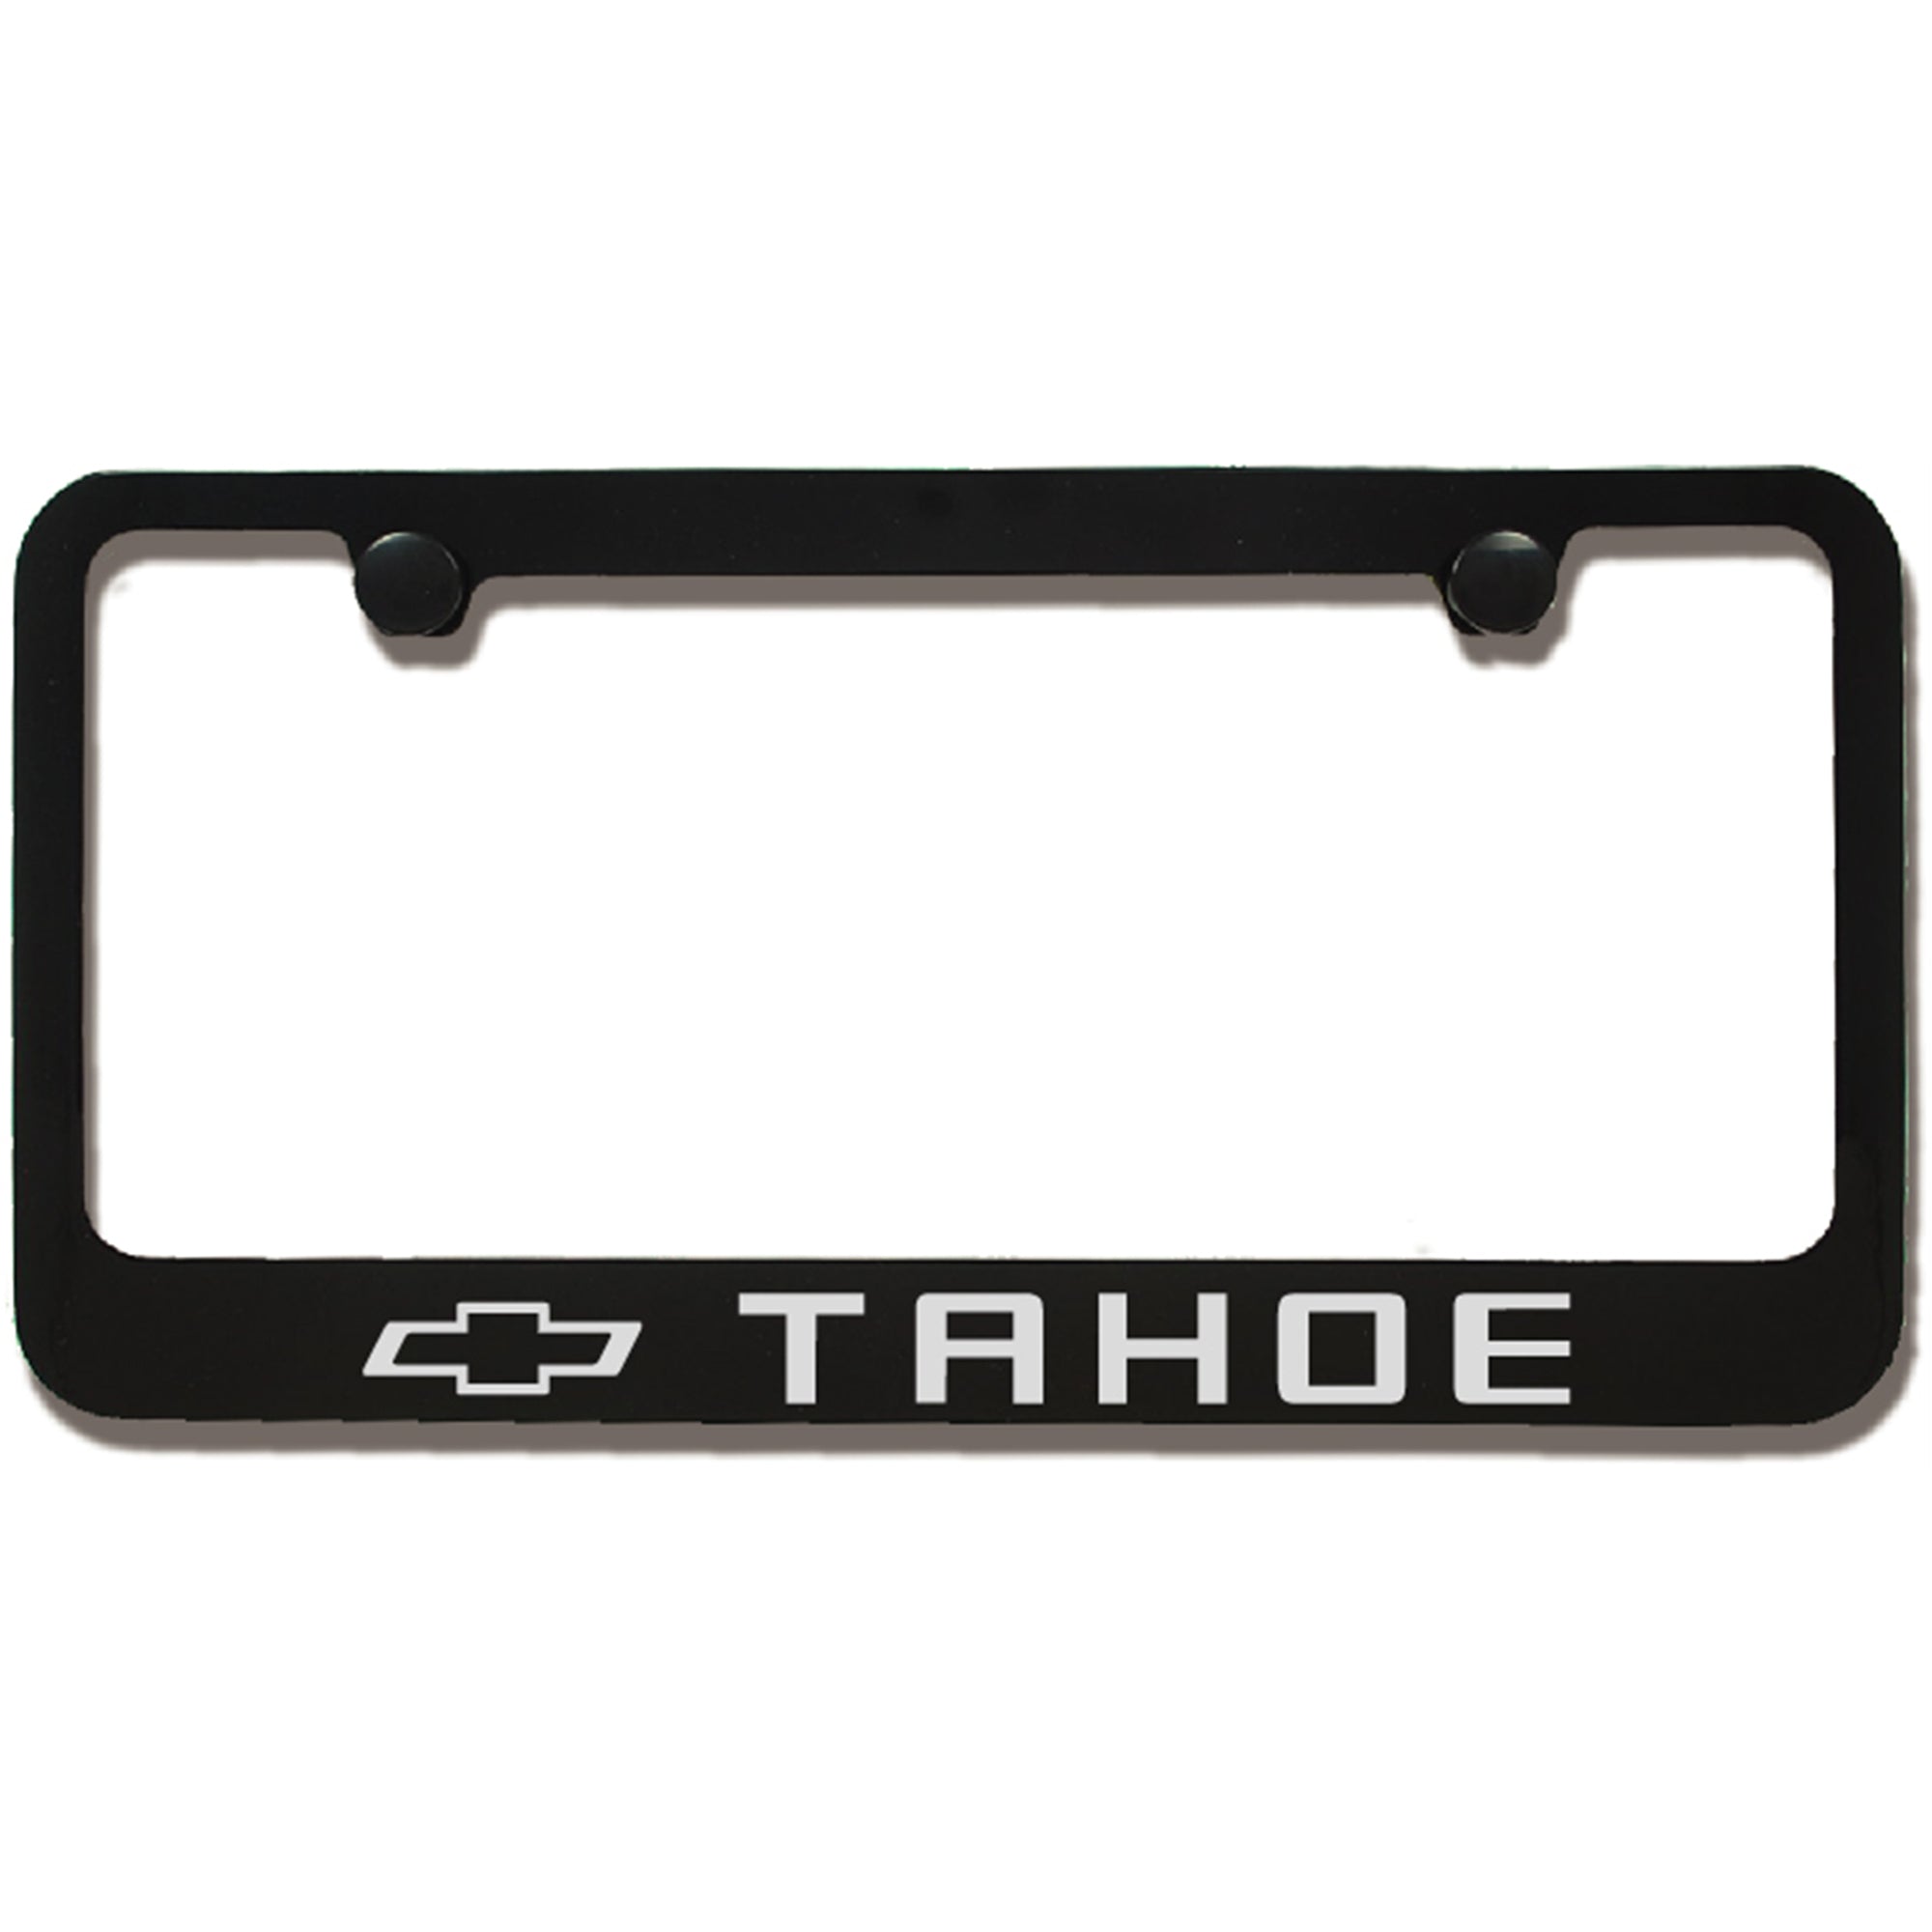 Chevy,Tahoe,License Plate Frame